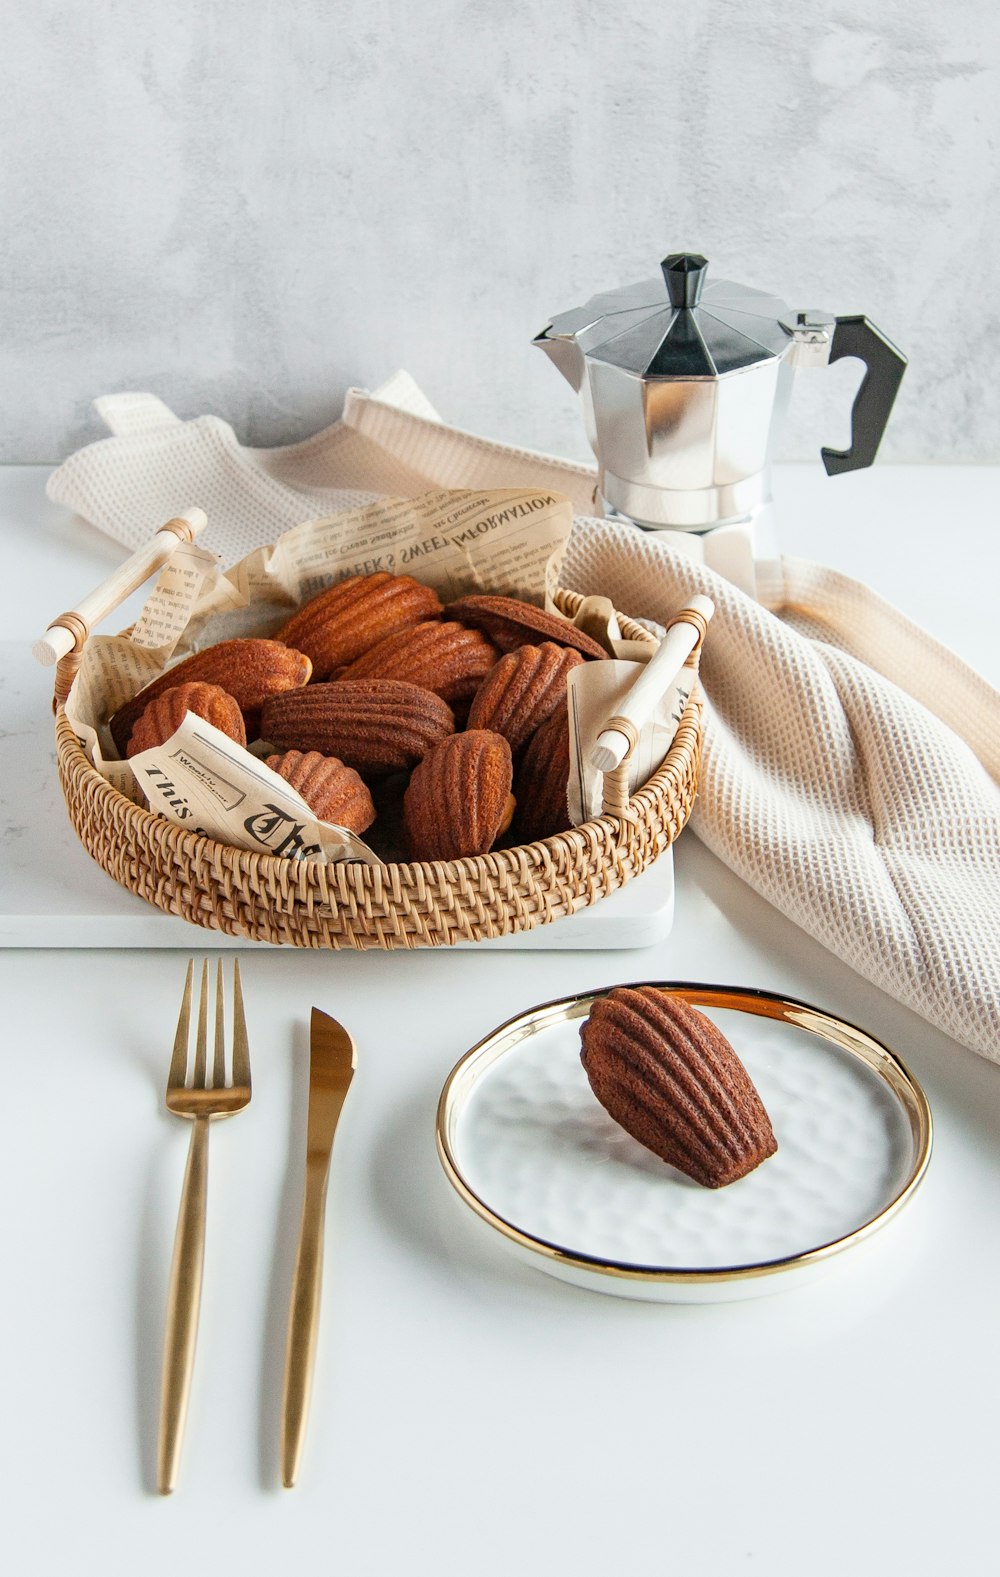 a basket of nuts on a plate next to a cup of coffee